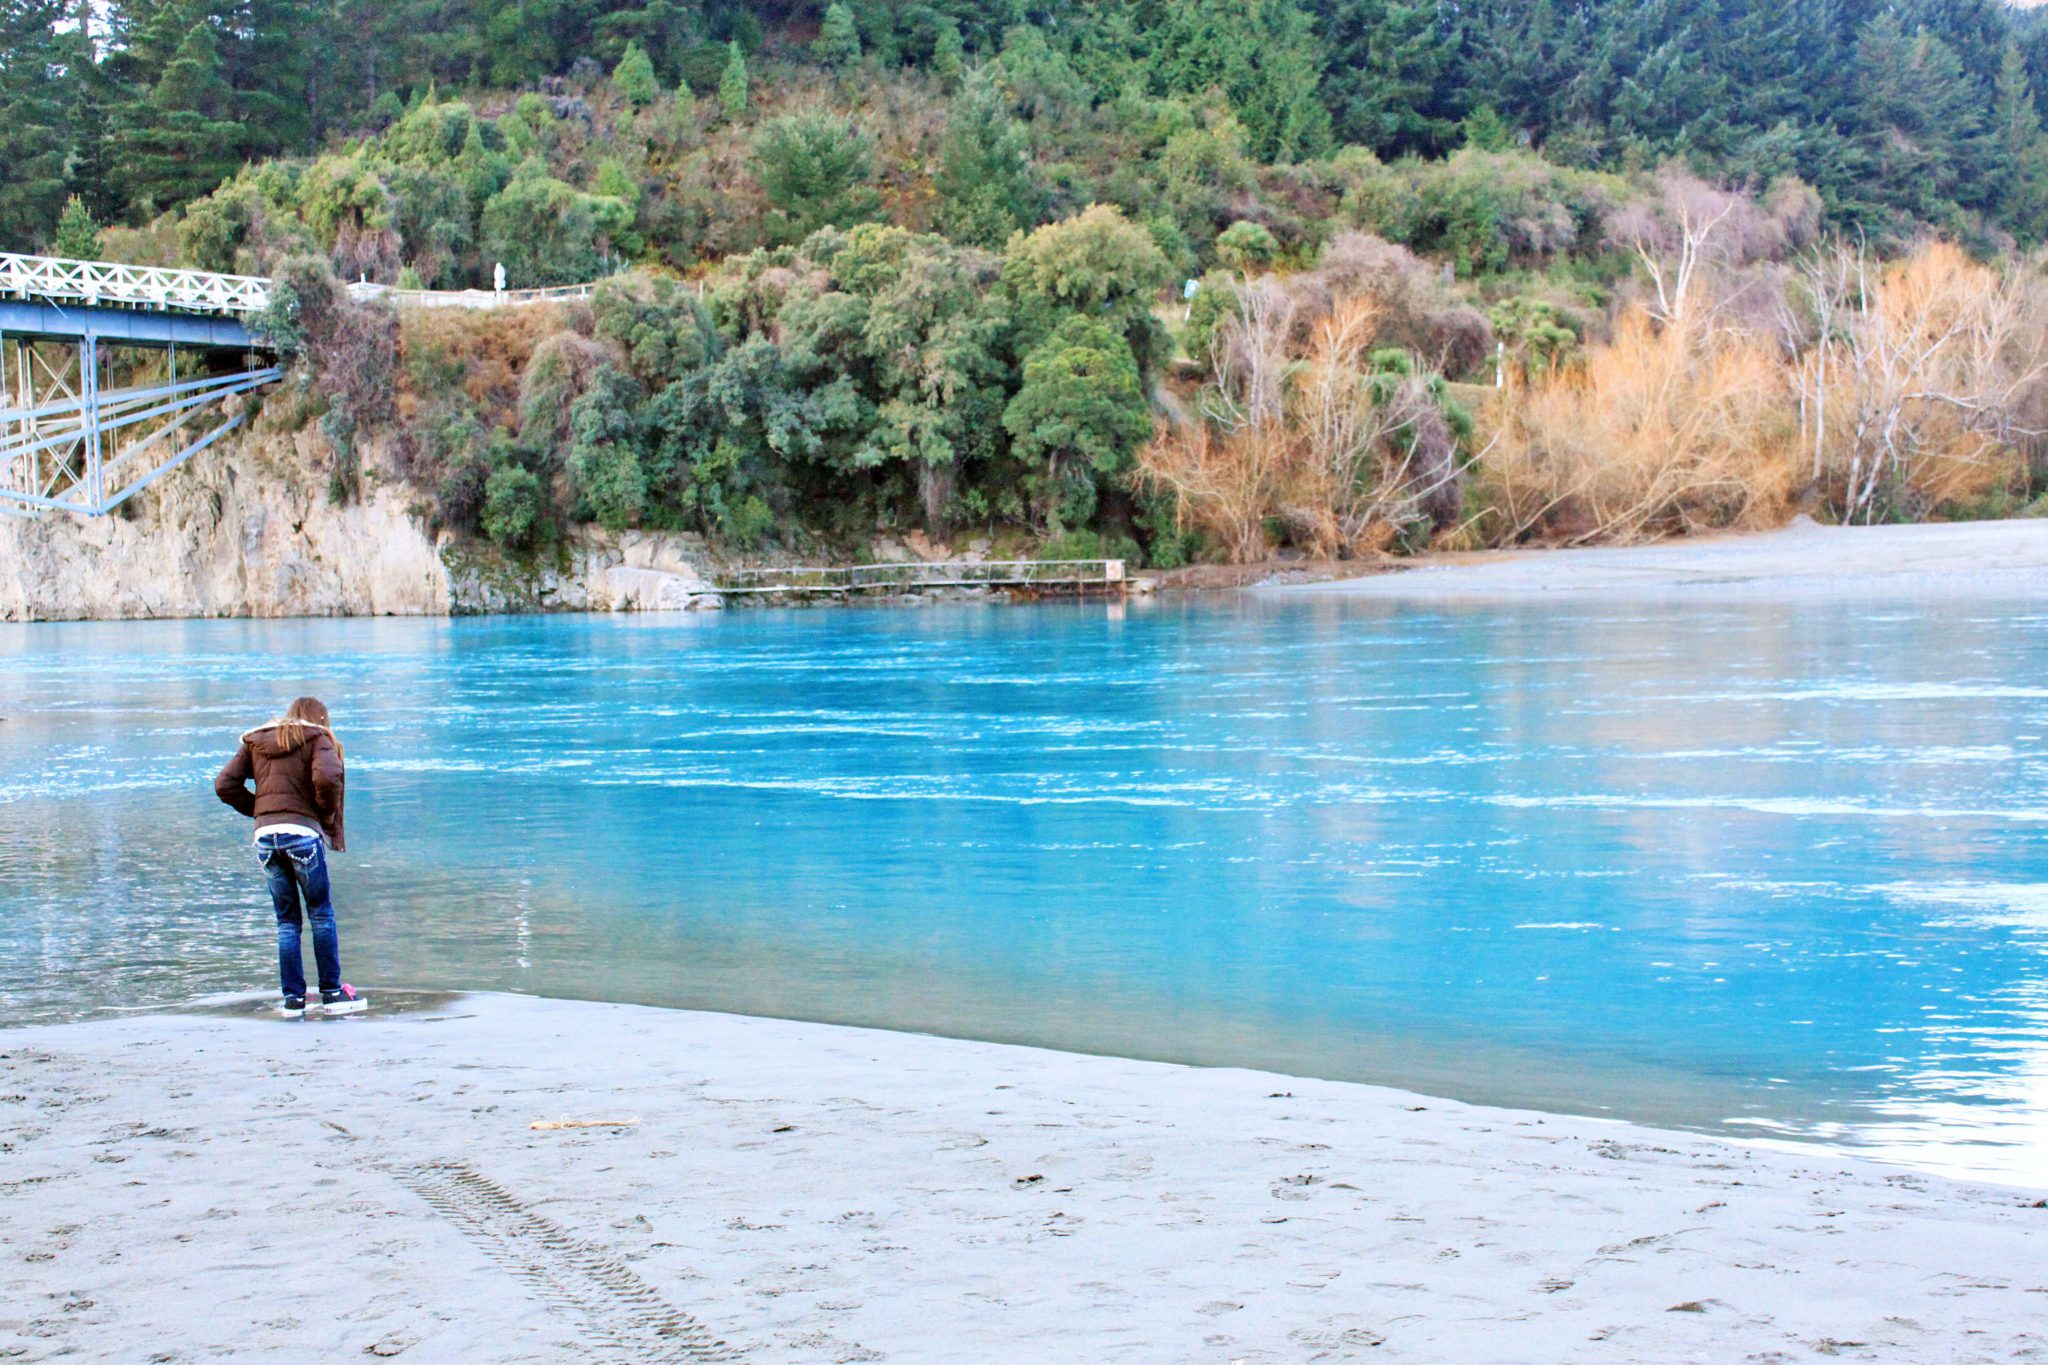 Rakaia Gorge is a hidden gem in New Zealand- Visit these 17 underrated spots on New Zealand's South Island- Where to go in New Zealand #newzealand #southisland #rakaiagorge